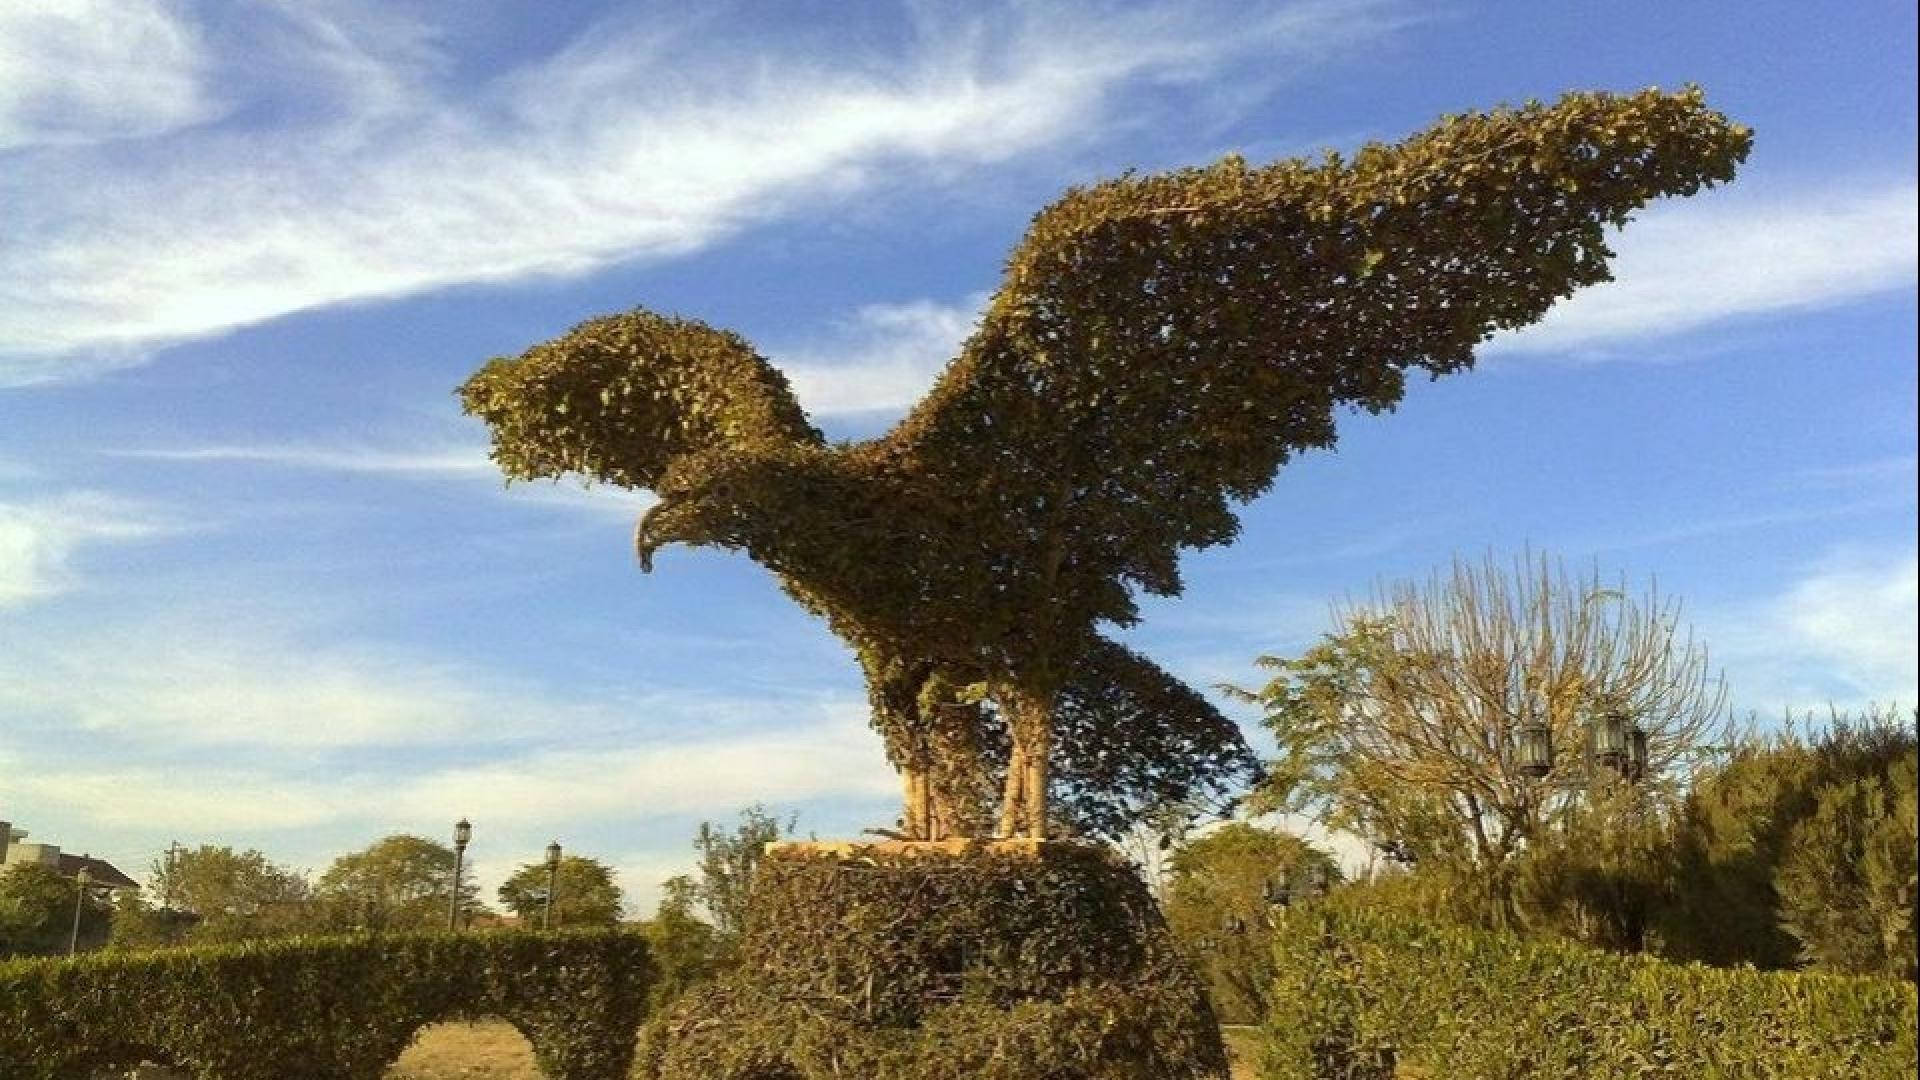 Stunning Topiary Eagle At Minare Park, Iraq Background